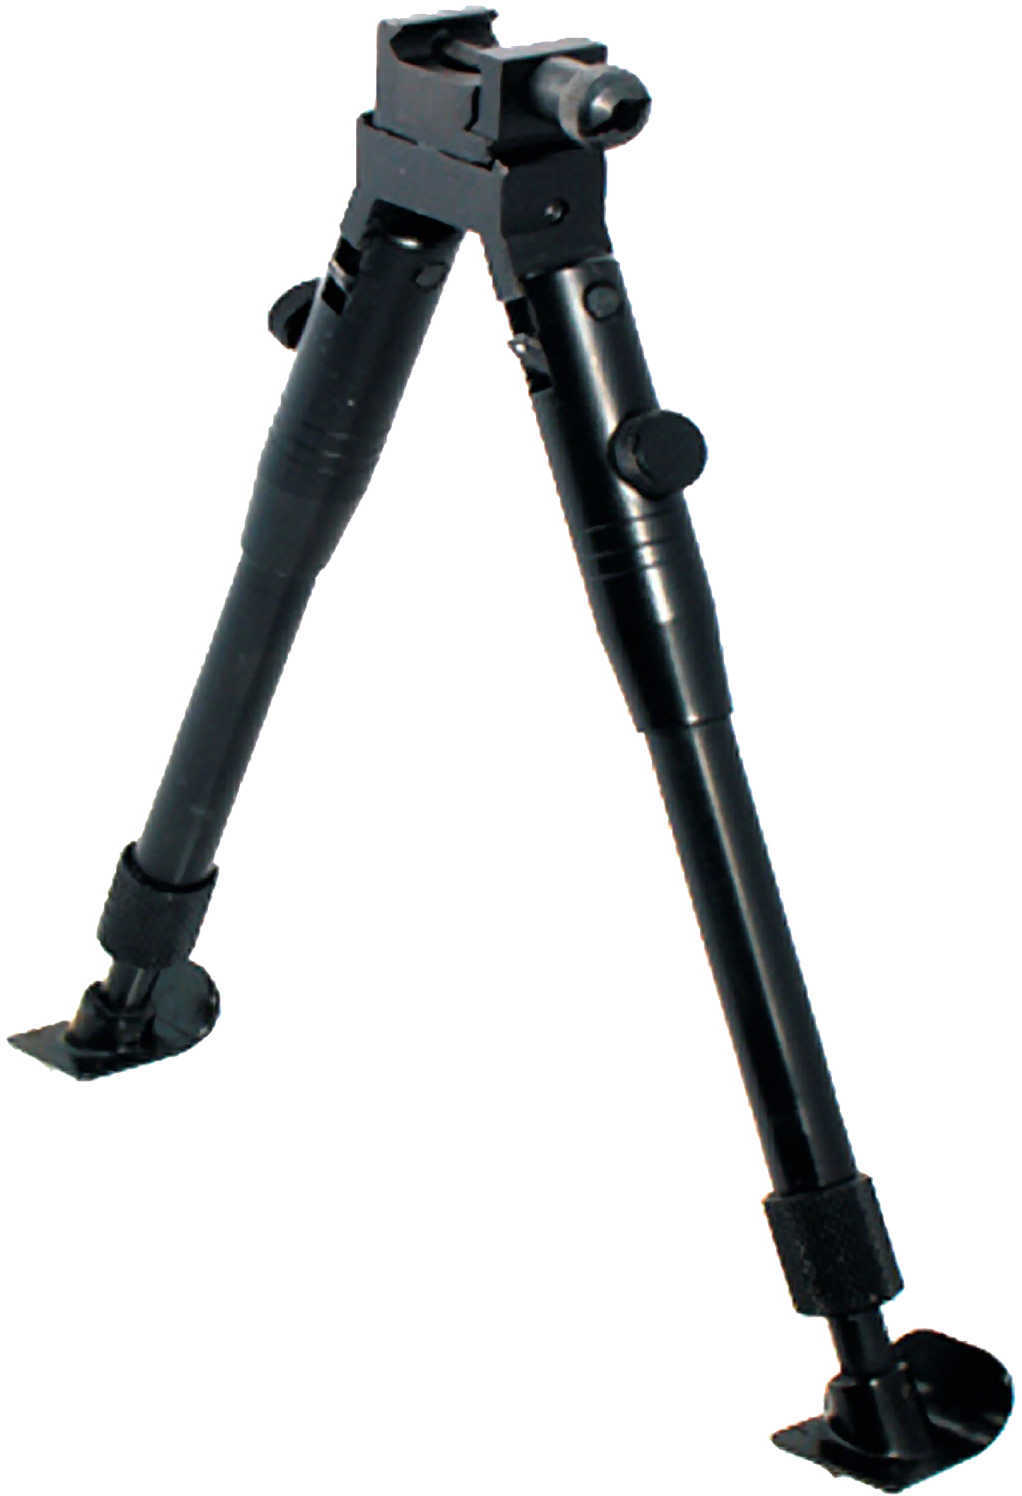 Leapers Utg Universal Shooters Tactical Bipod Steel Combat Stand TL-BP69ST